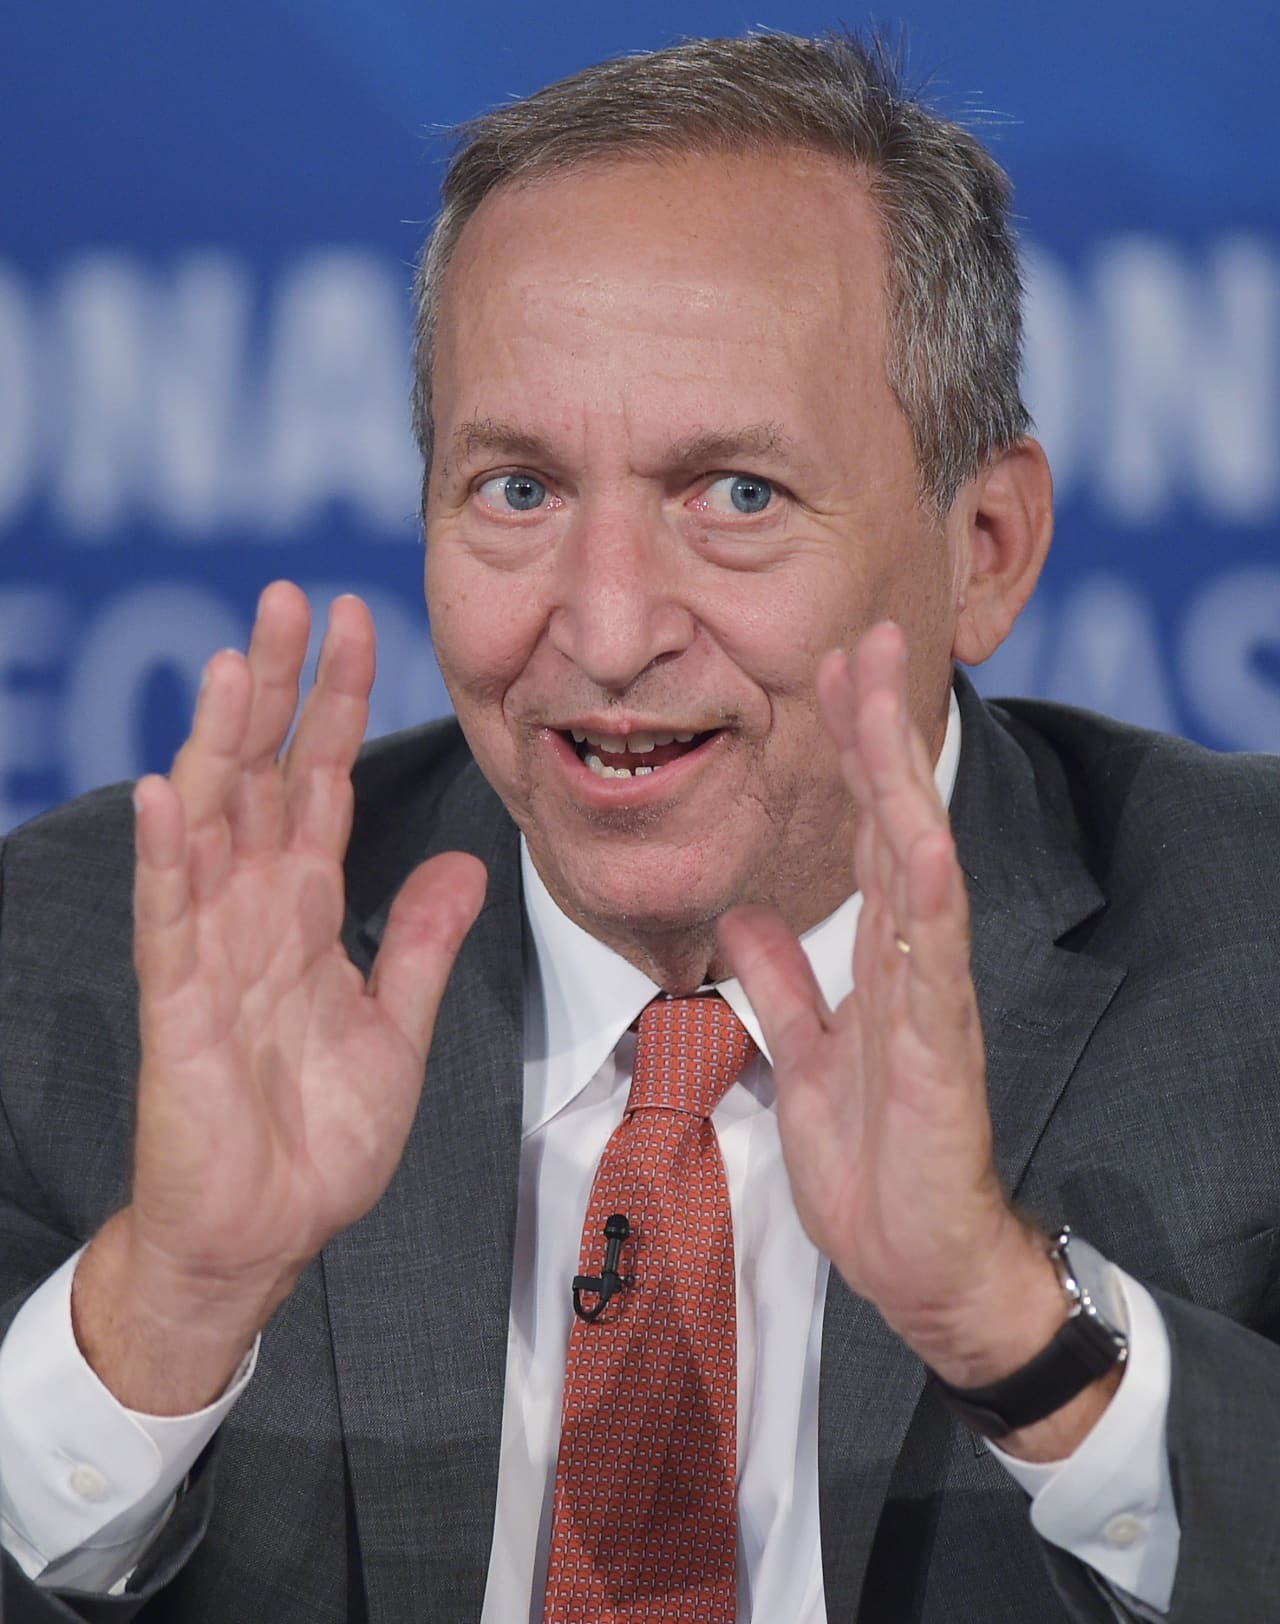 Markets are underpricing risks of populist politics in the U.S. and abroad, Larry Summers says